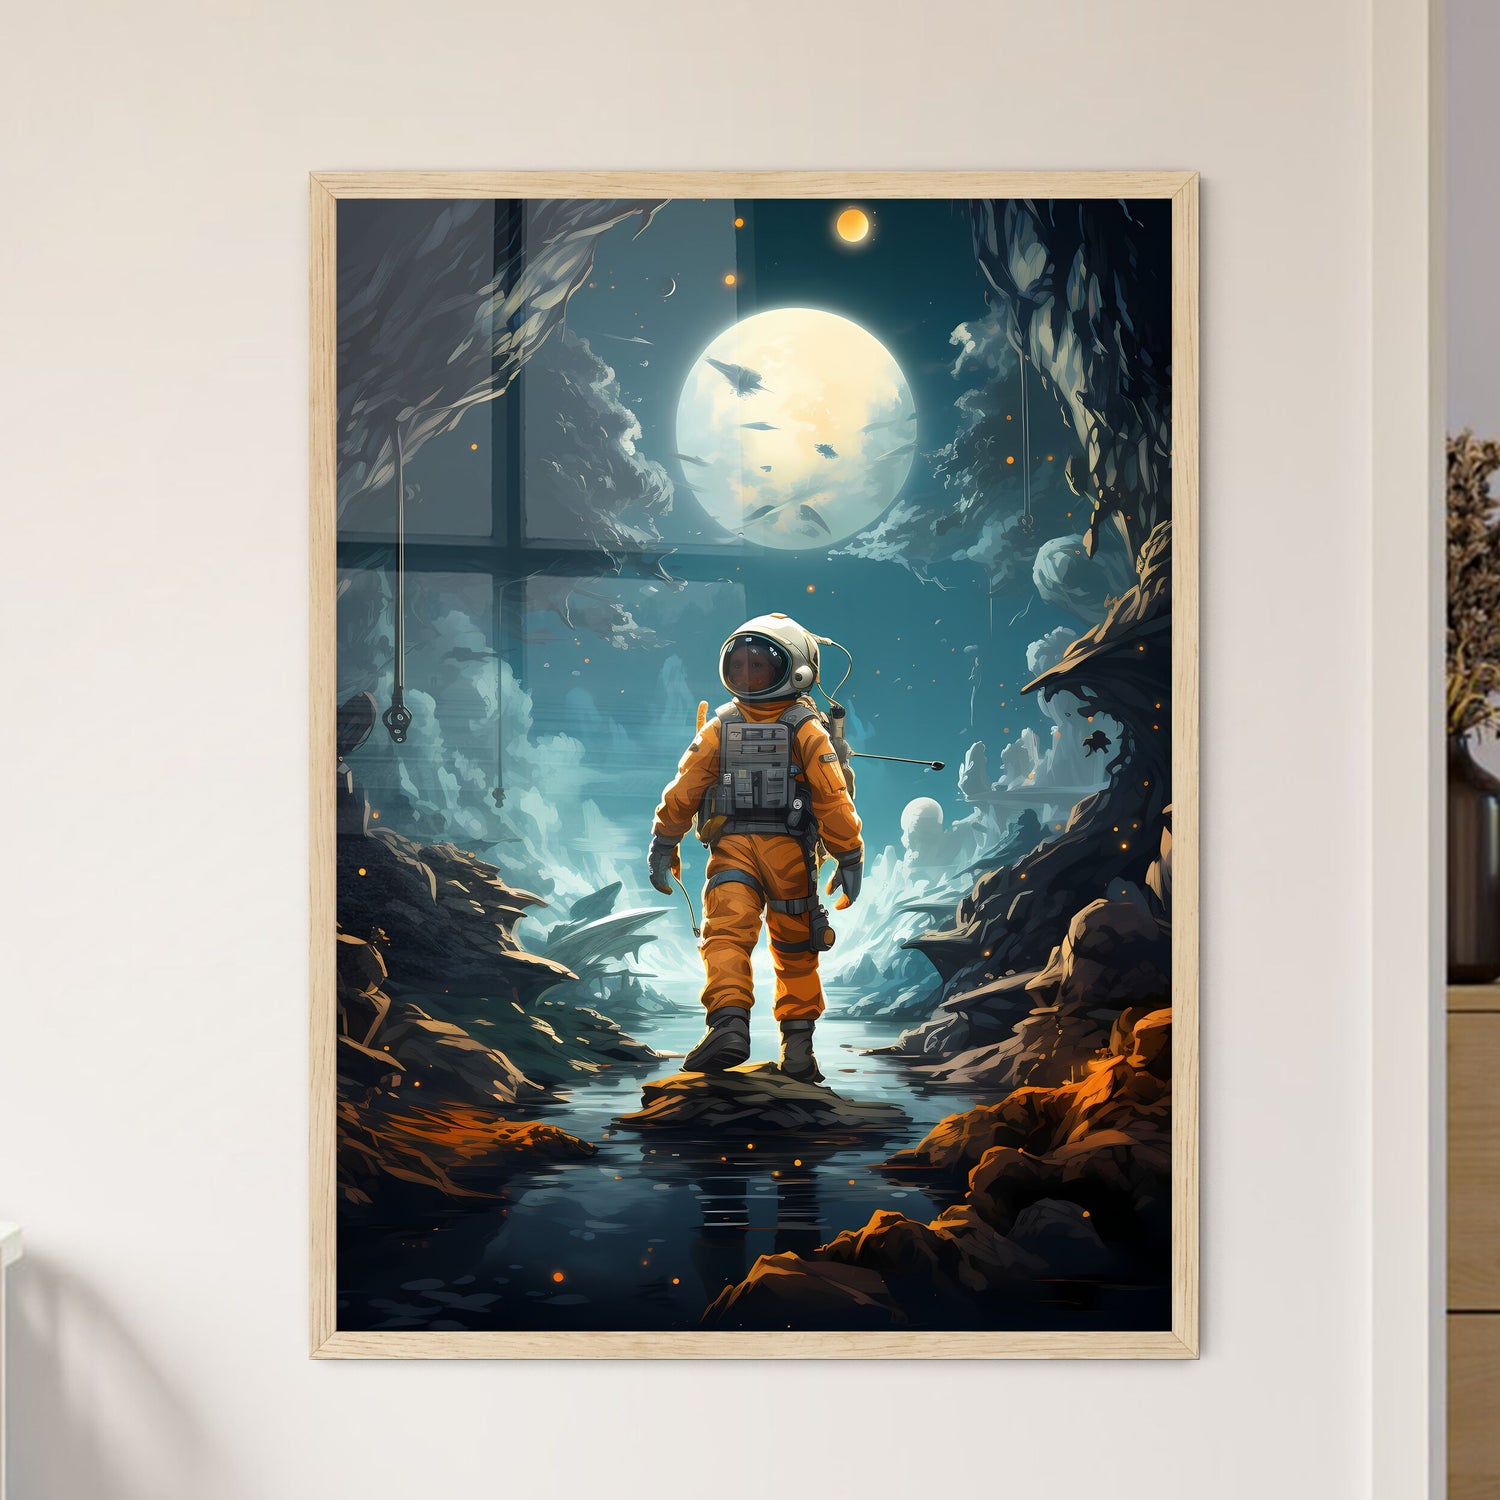 A Astronaut In An Orange Suit Standing In A Stream With A Full Moon Default Title